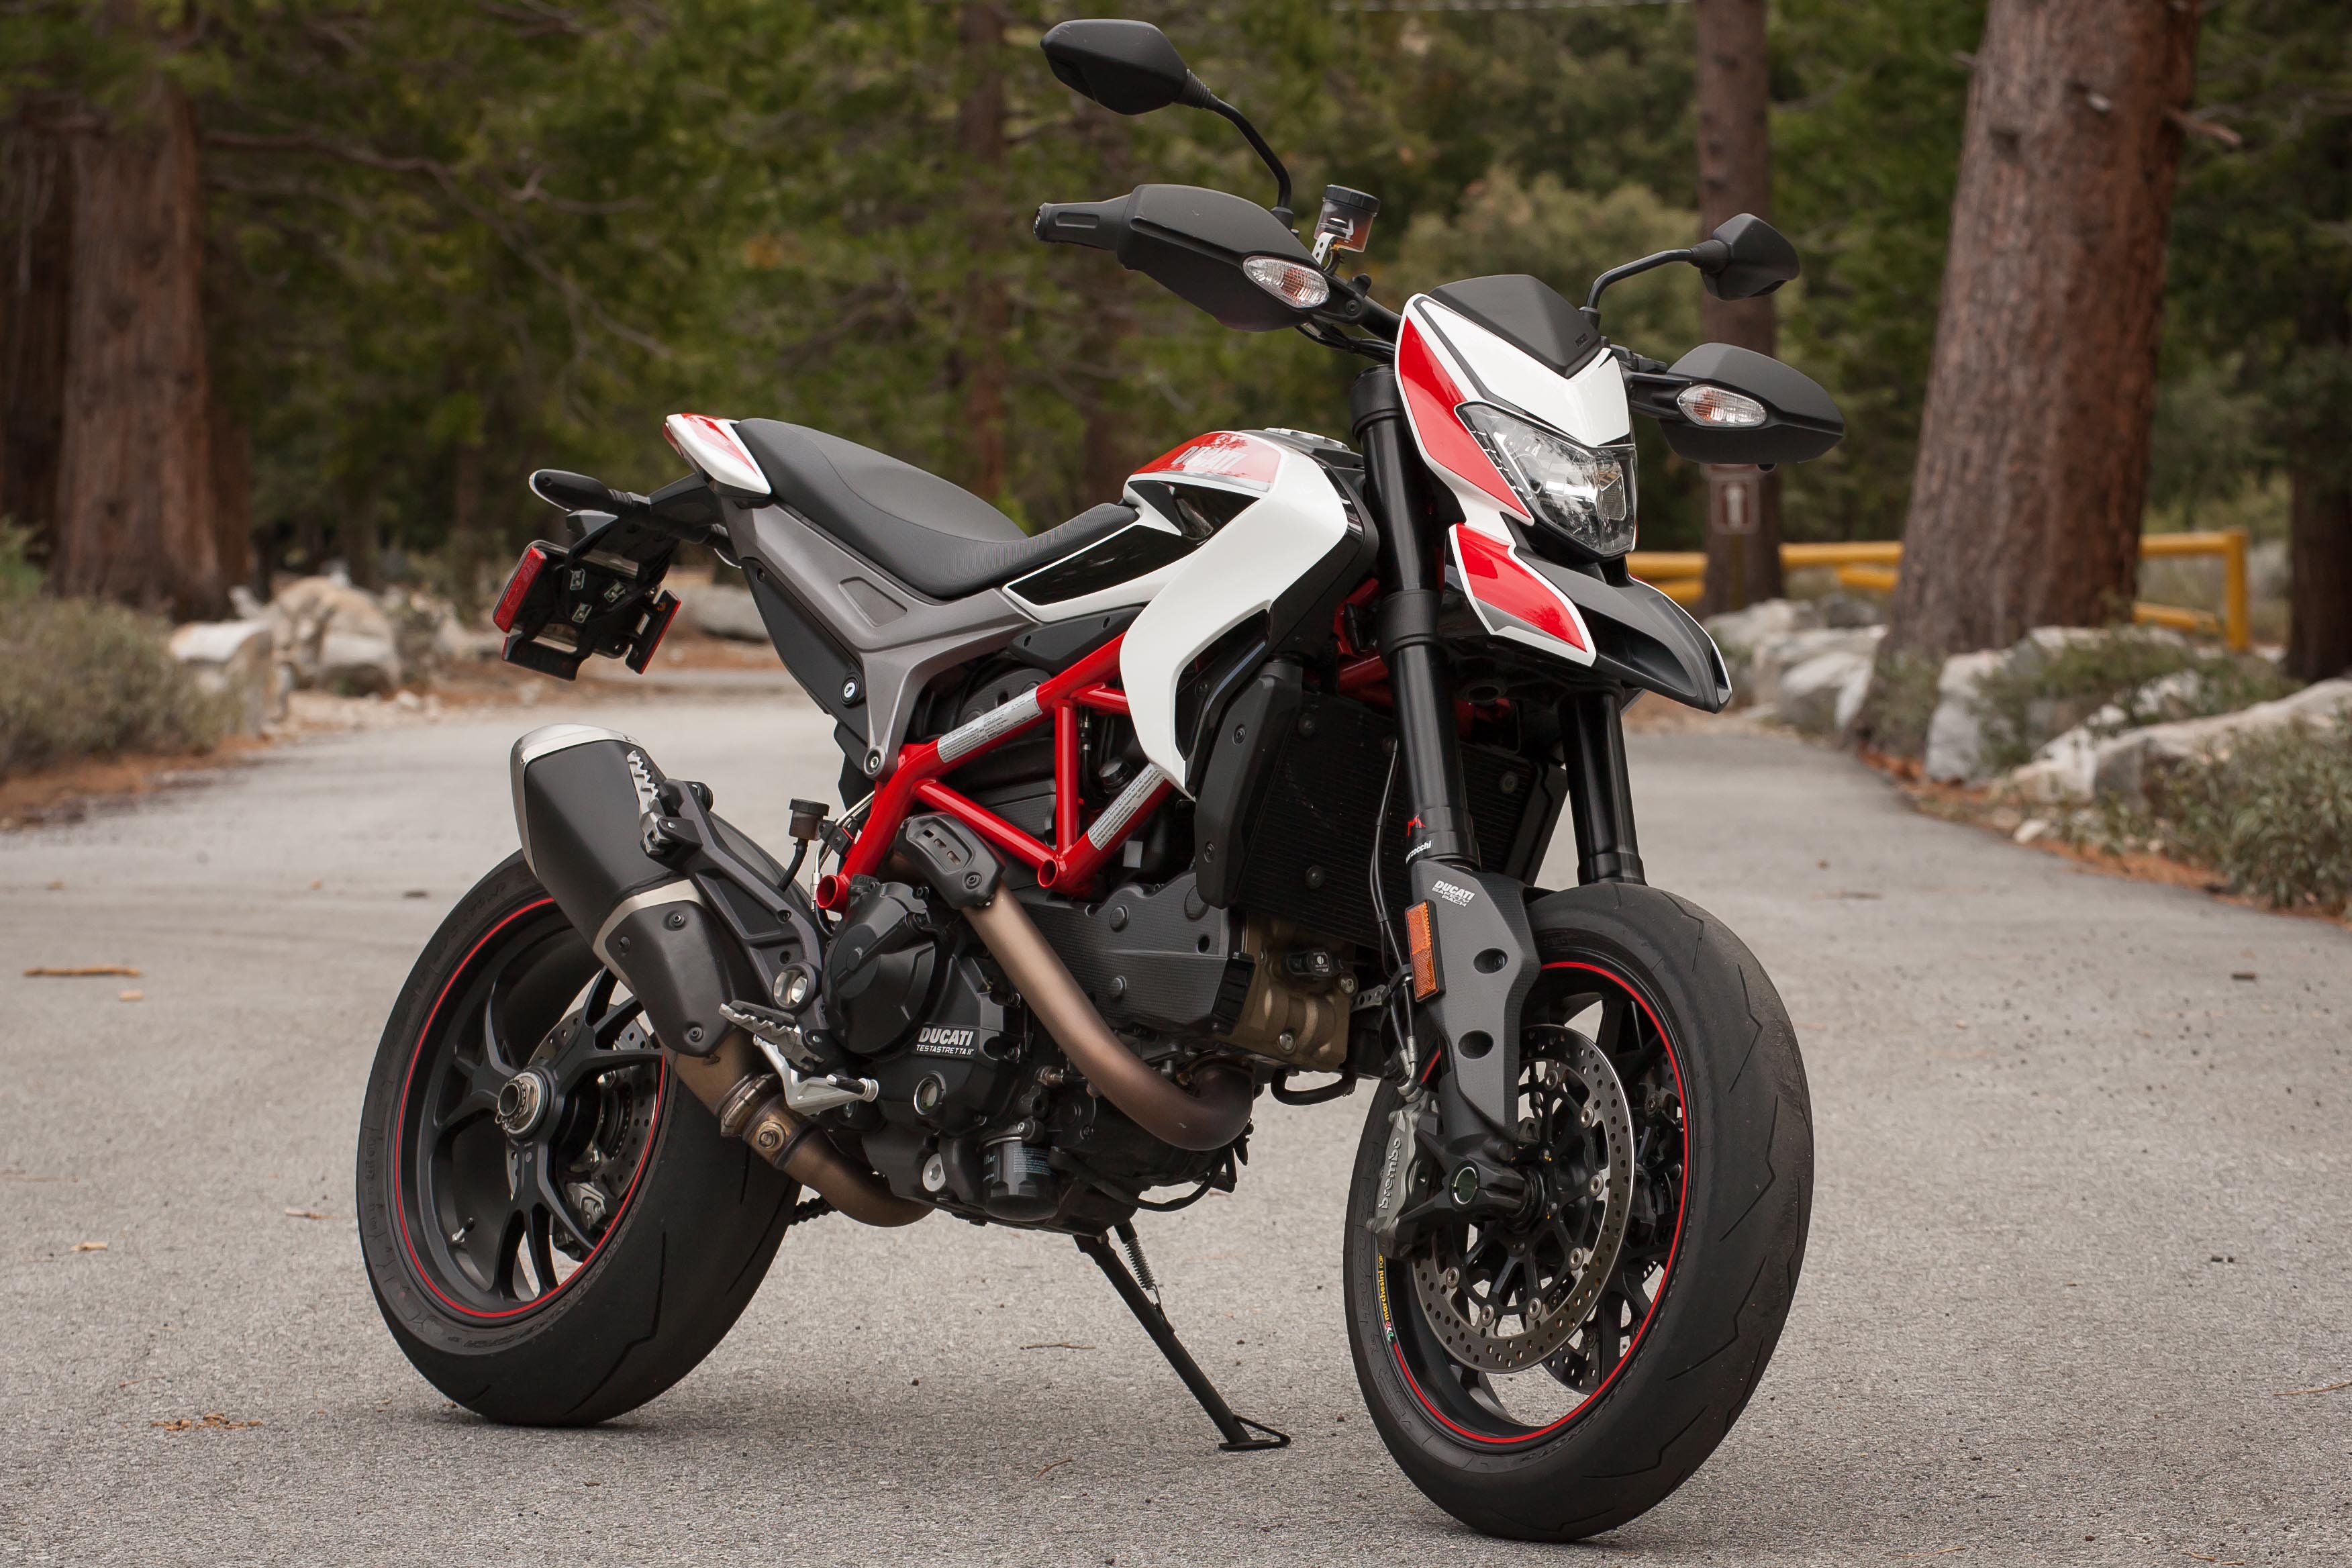 2014 Ducati Hypermotard SP pics specs and information 3504x2336